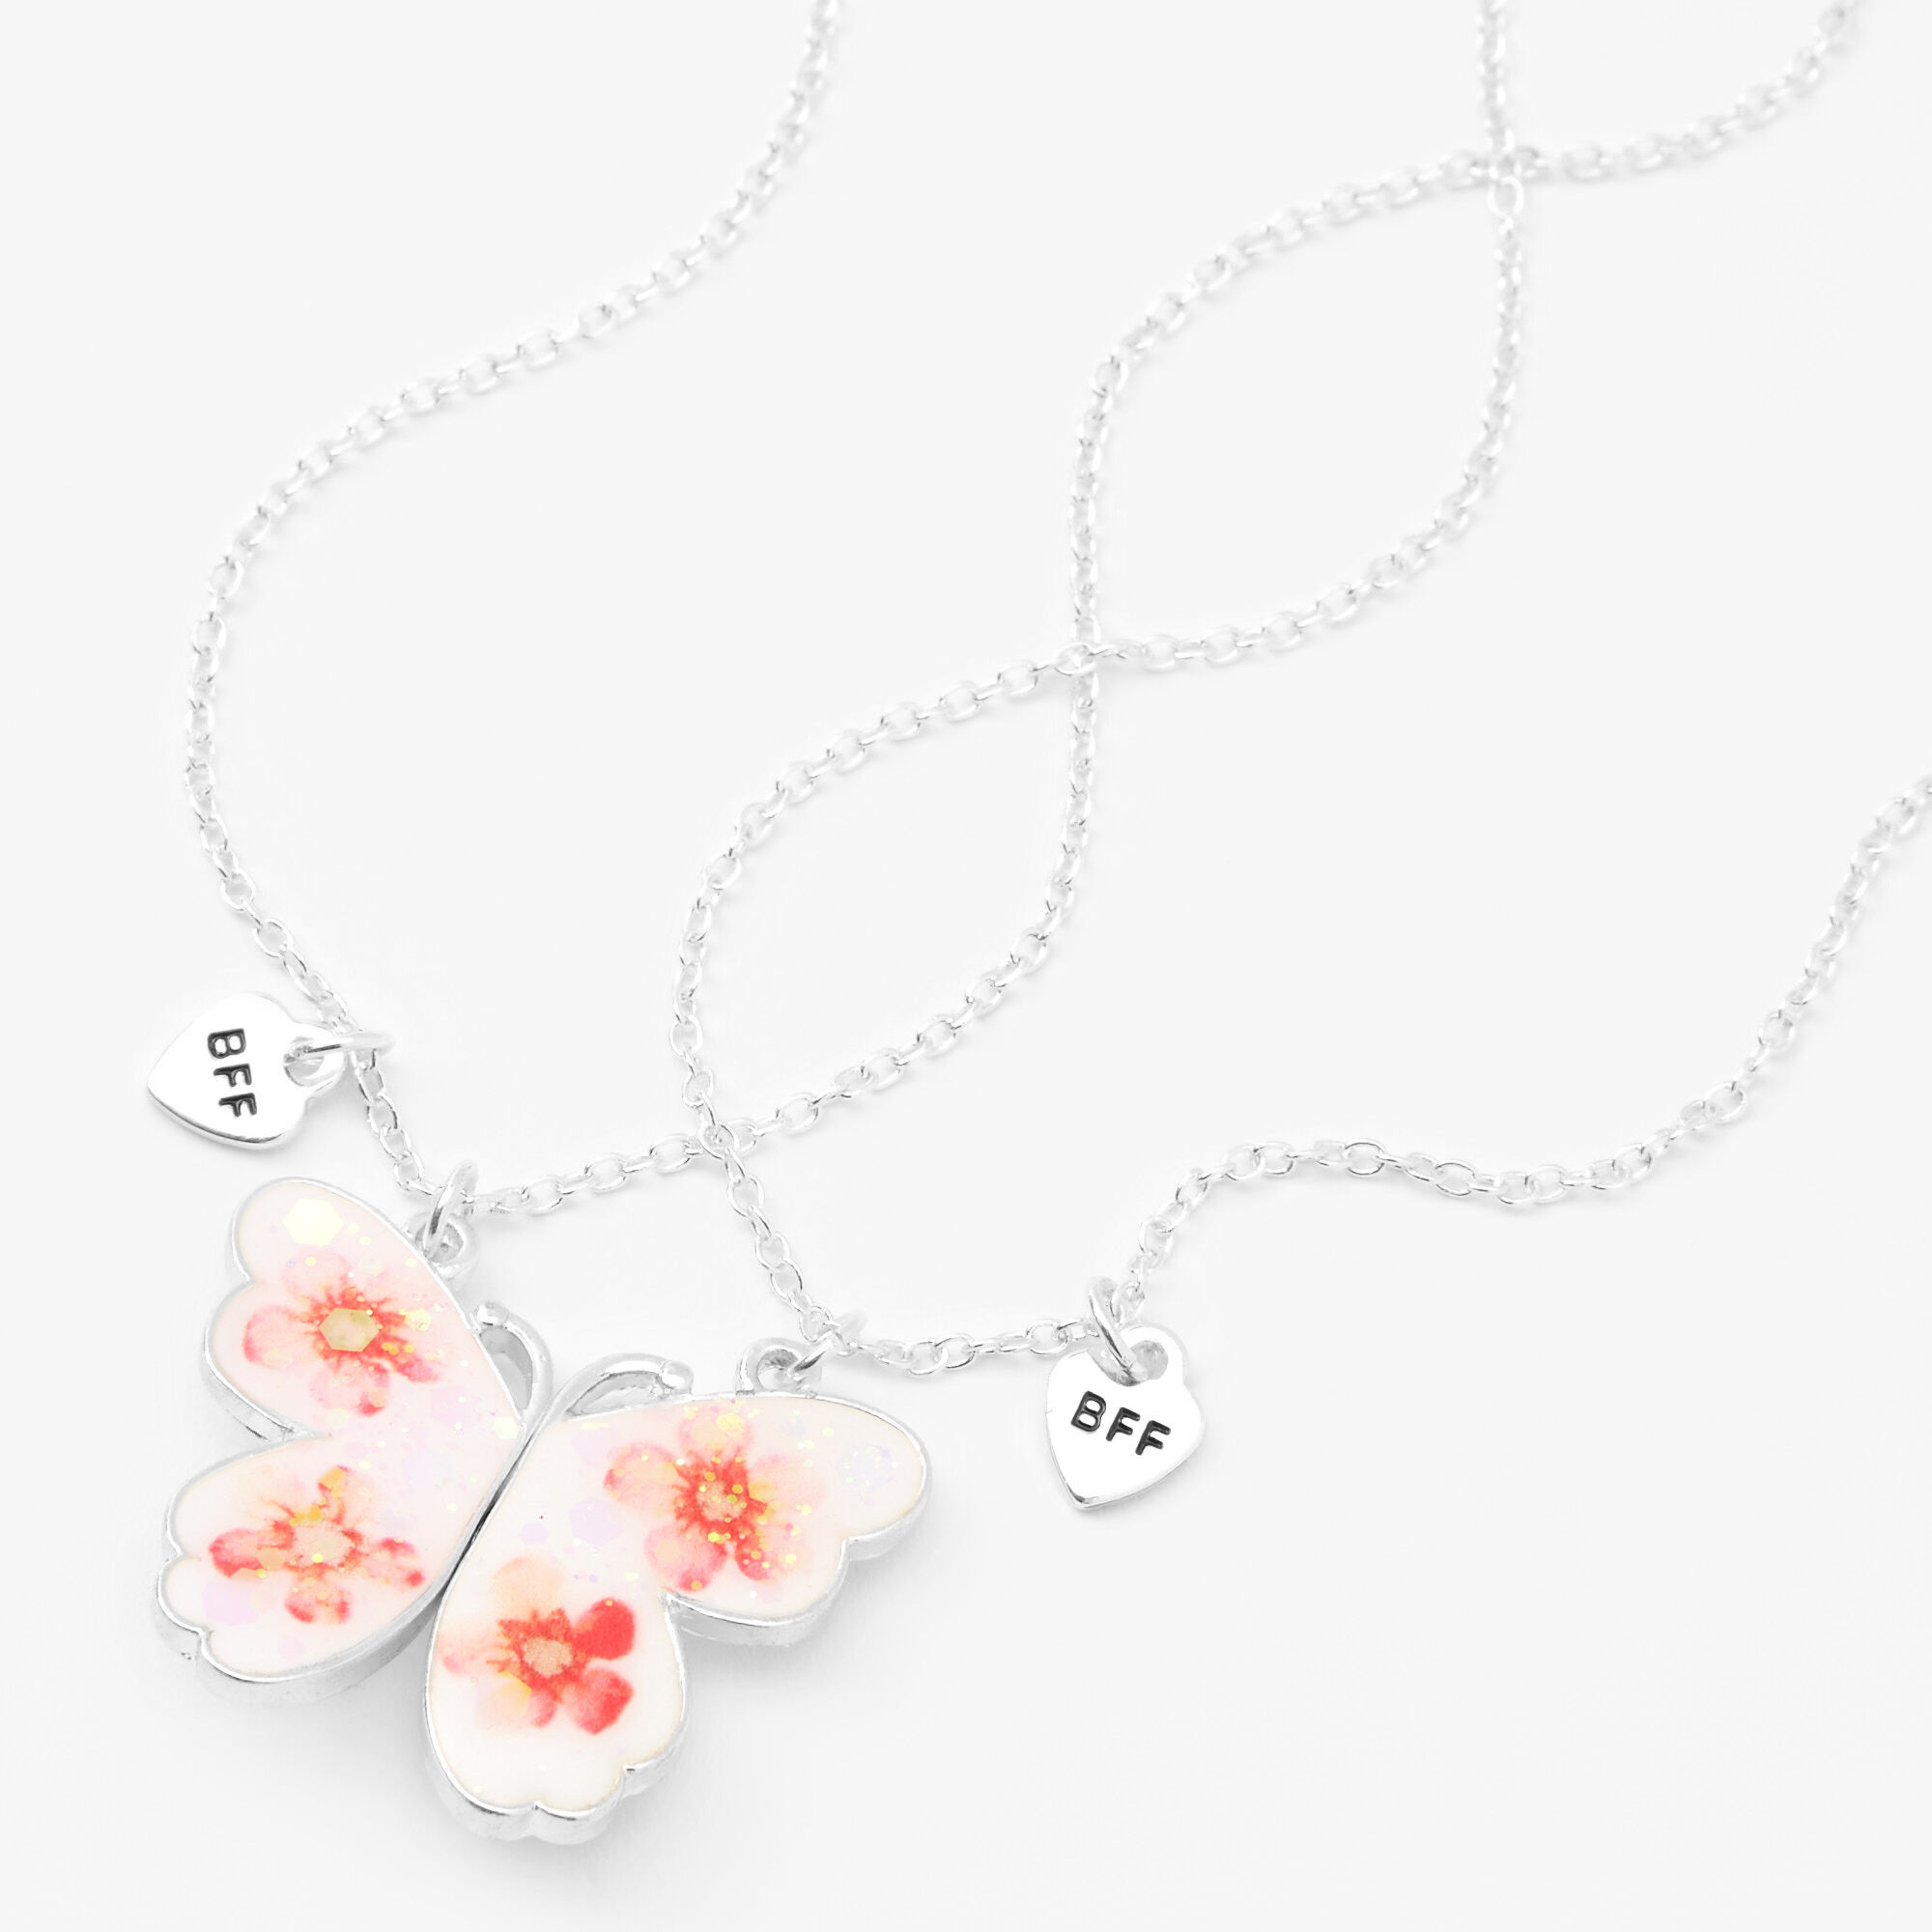 Flower Best Friends 2 Piece Necklace Set Keep One Give One BFF